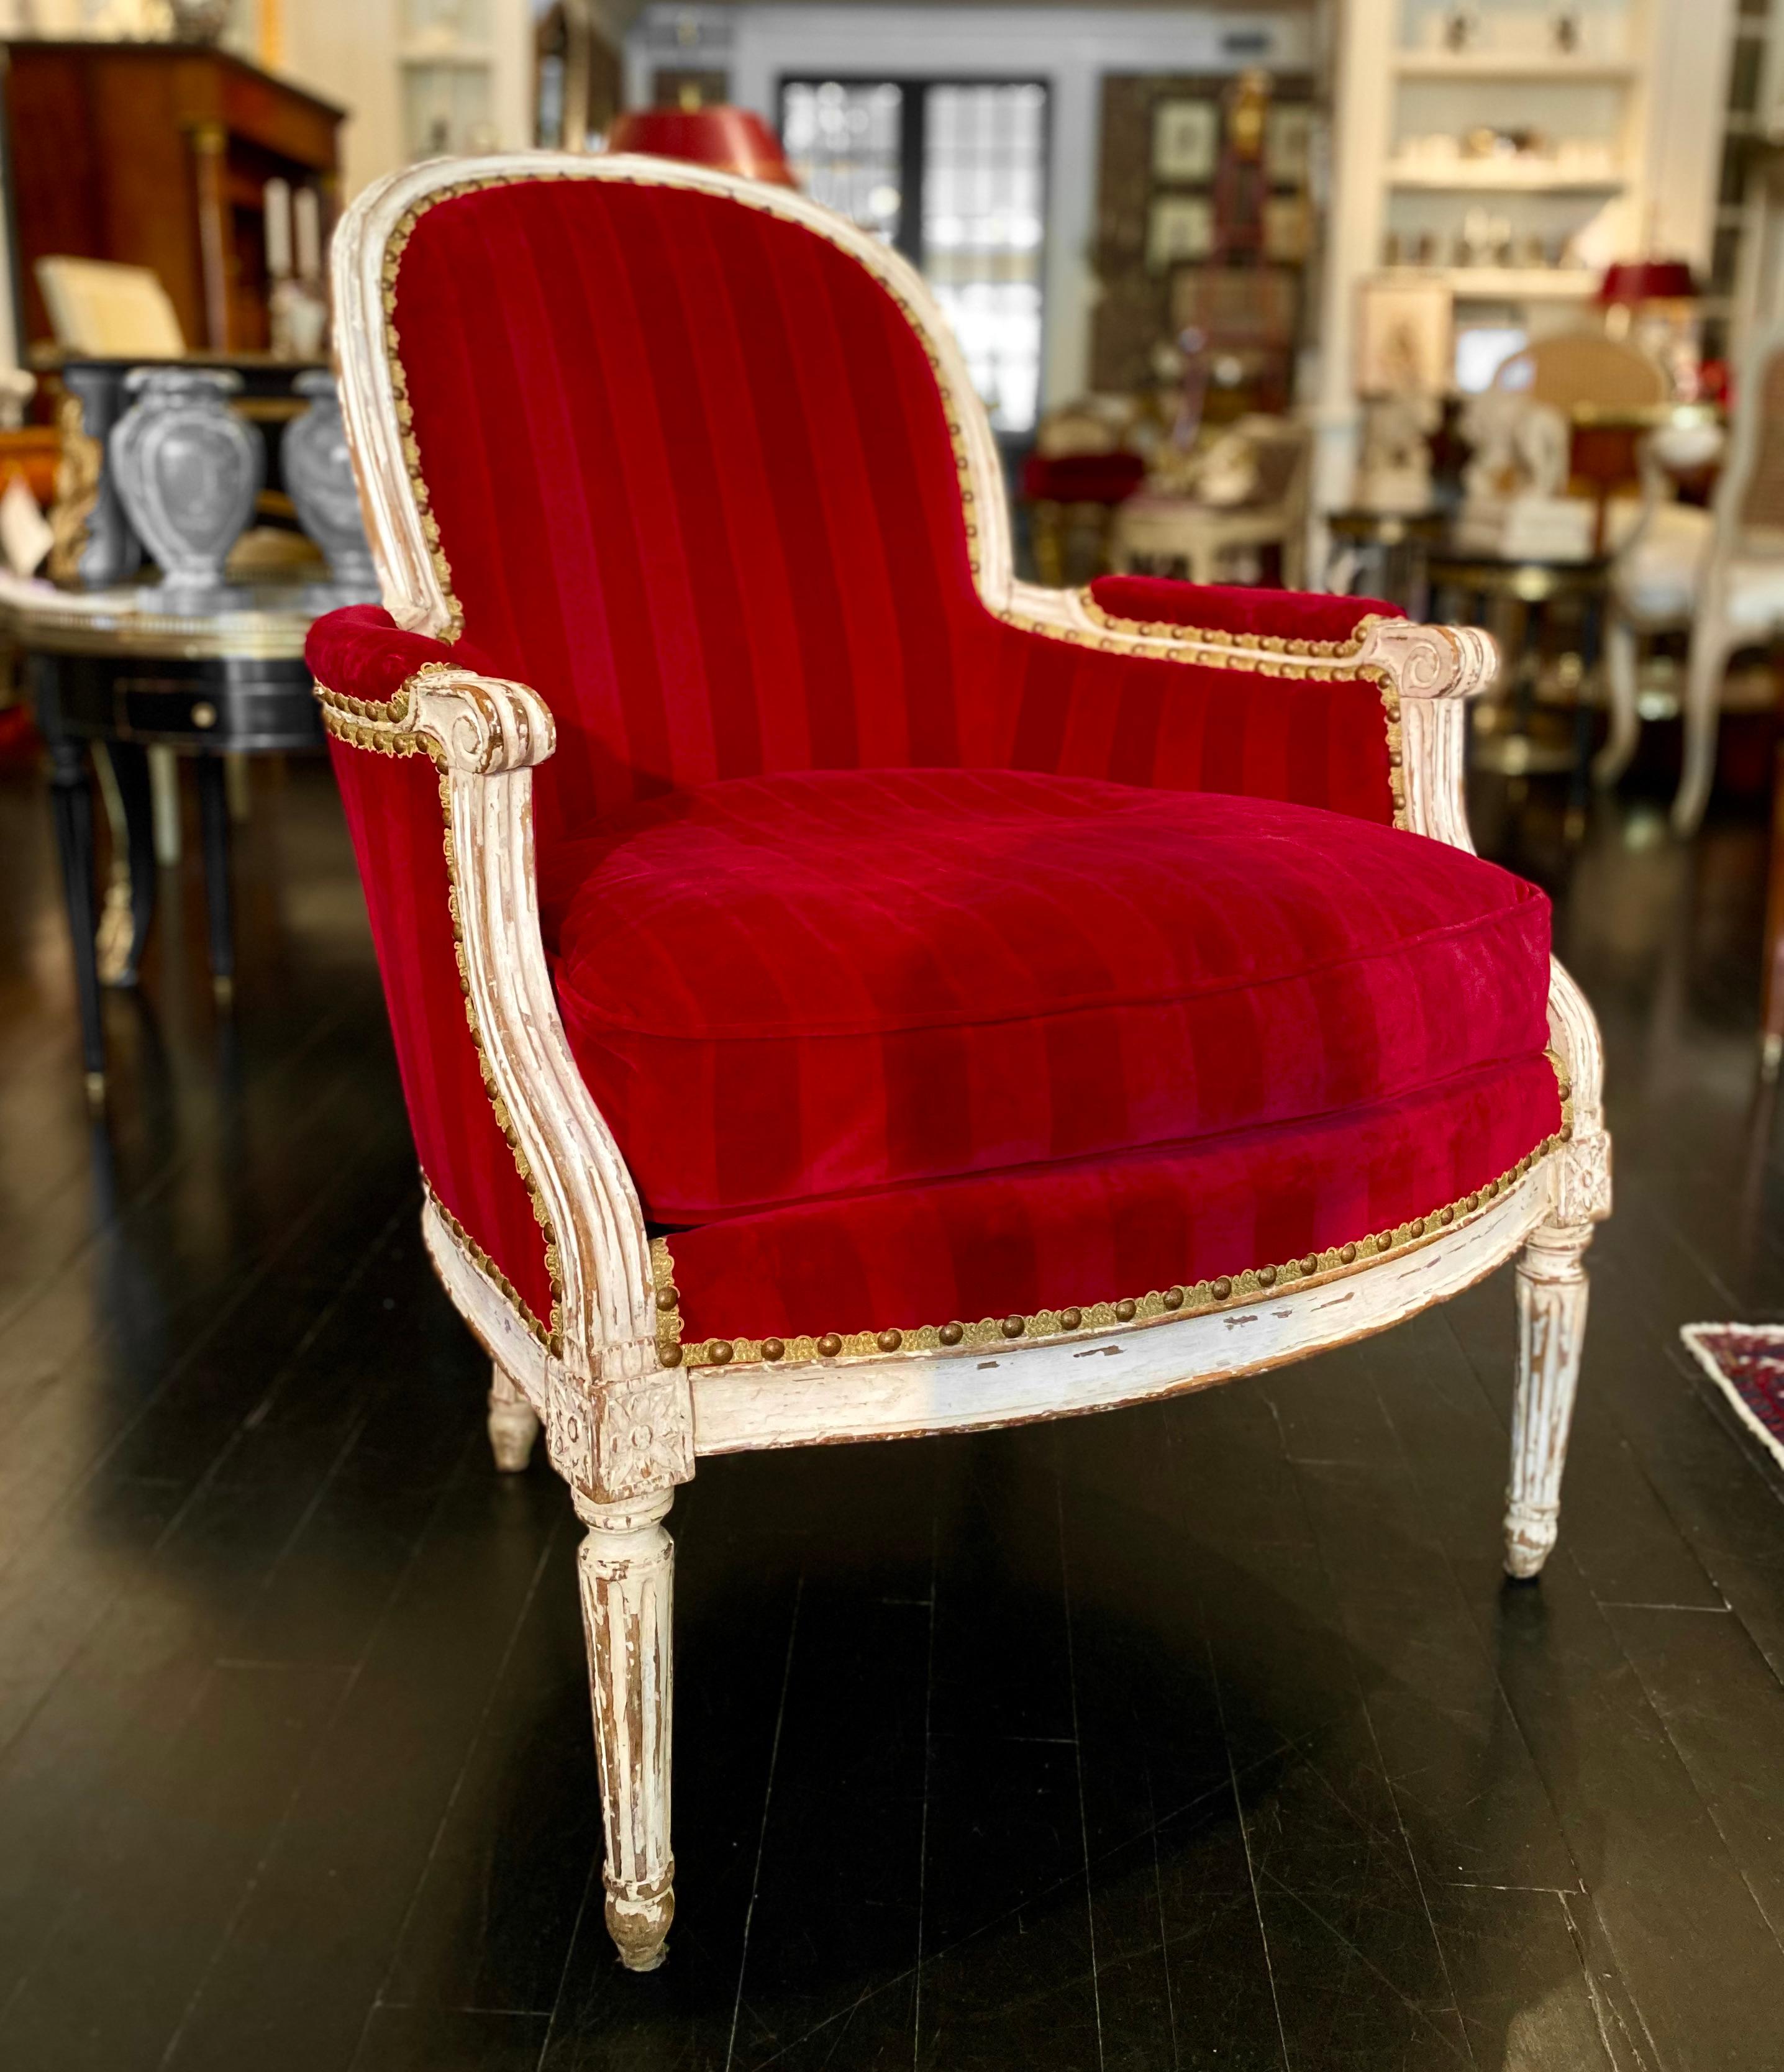 French Louis XVI style bergère armchair upholstered in red velvet, 18th century
Deep and comfortable, Classic French chic

Dimensions: 36